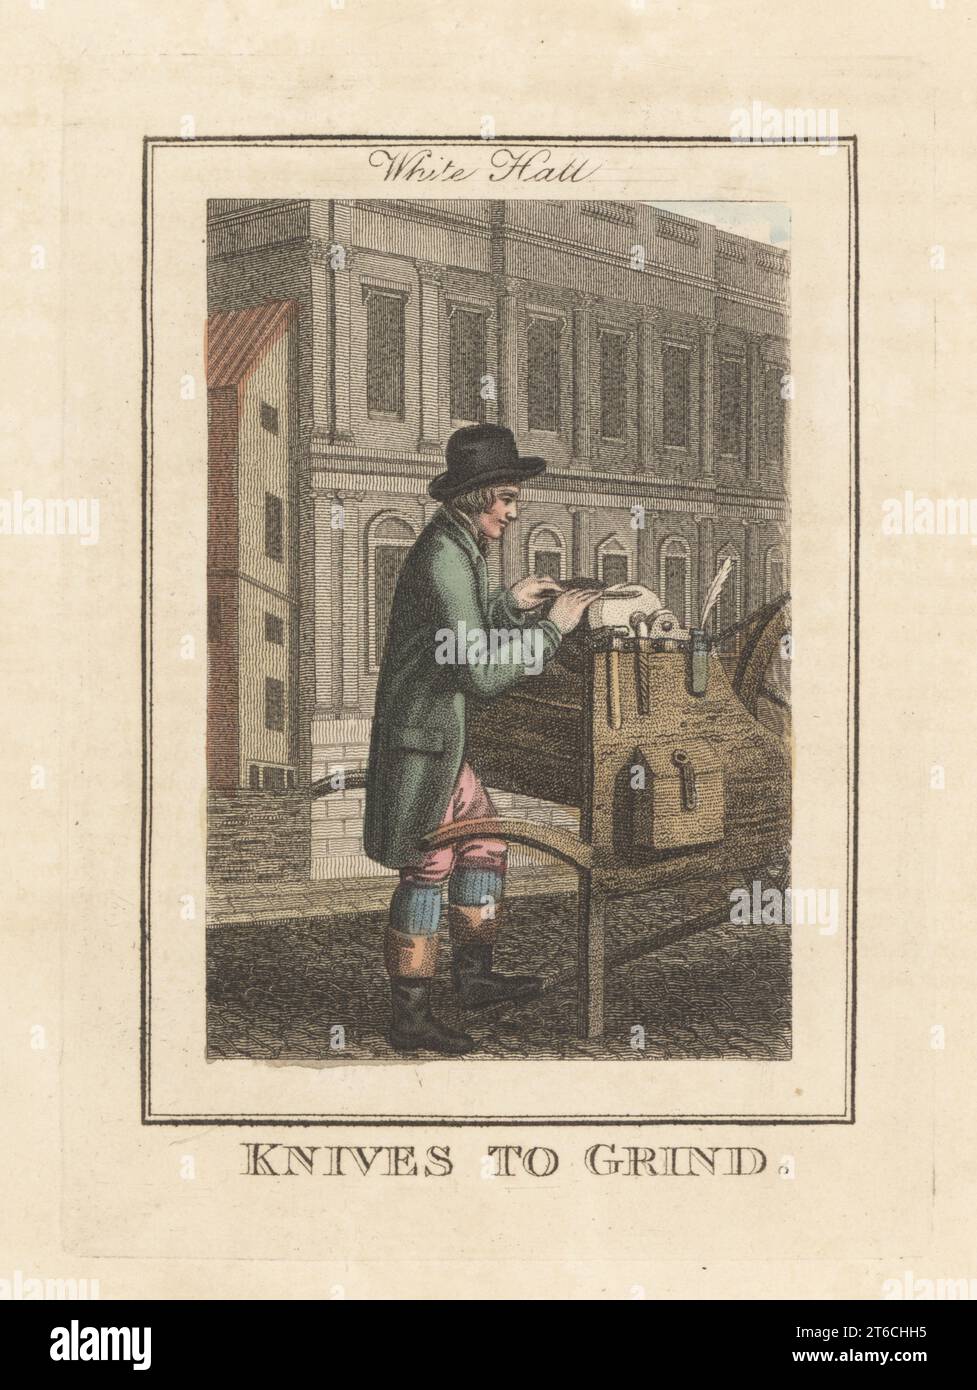 Knife-grinder sharpening a knife in front of Whitehall. In bowler hat, coat, breeches and boots, using his left leg to drive whetting and grinding wheels to polish a kitchen knife. The facade of Whitehall designed by Inigo Jones in the background. Handcoloured copperplate engraving by Edward Edwards after an illustration by William Marshall Craig from Description of the Plates Representing the Itinerant Traders of London, Richard Phillips, No. 71 St Pauls Churchyard, London, 1805. Stock Photo